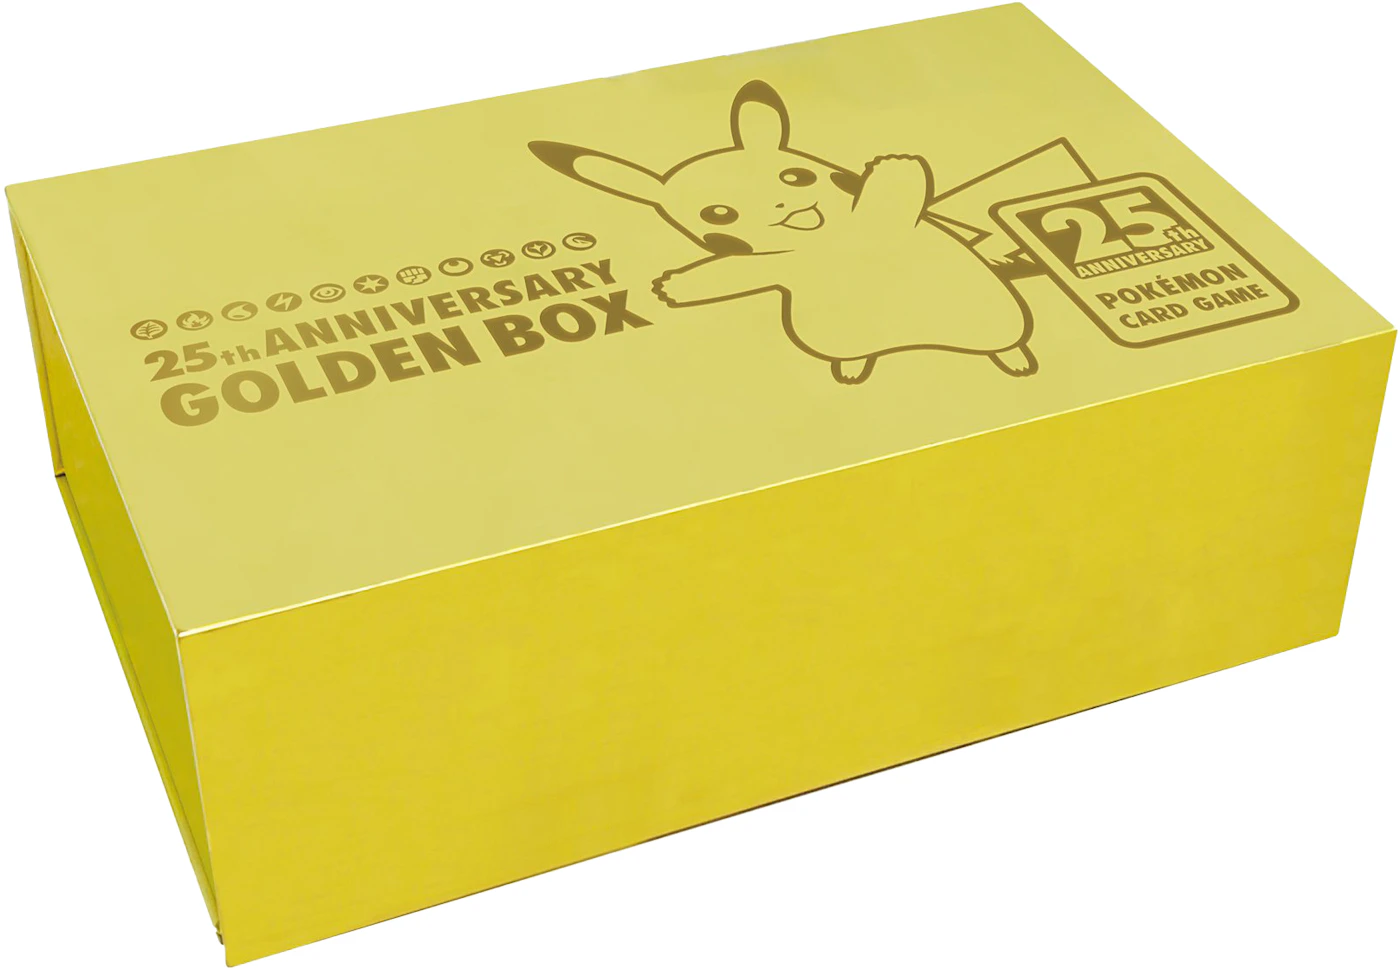 pok-mon-tcg-25th-anniversary-collection-golden-box-traditional-chinese